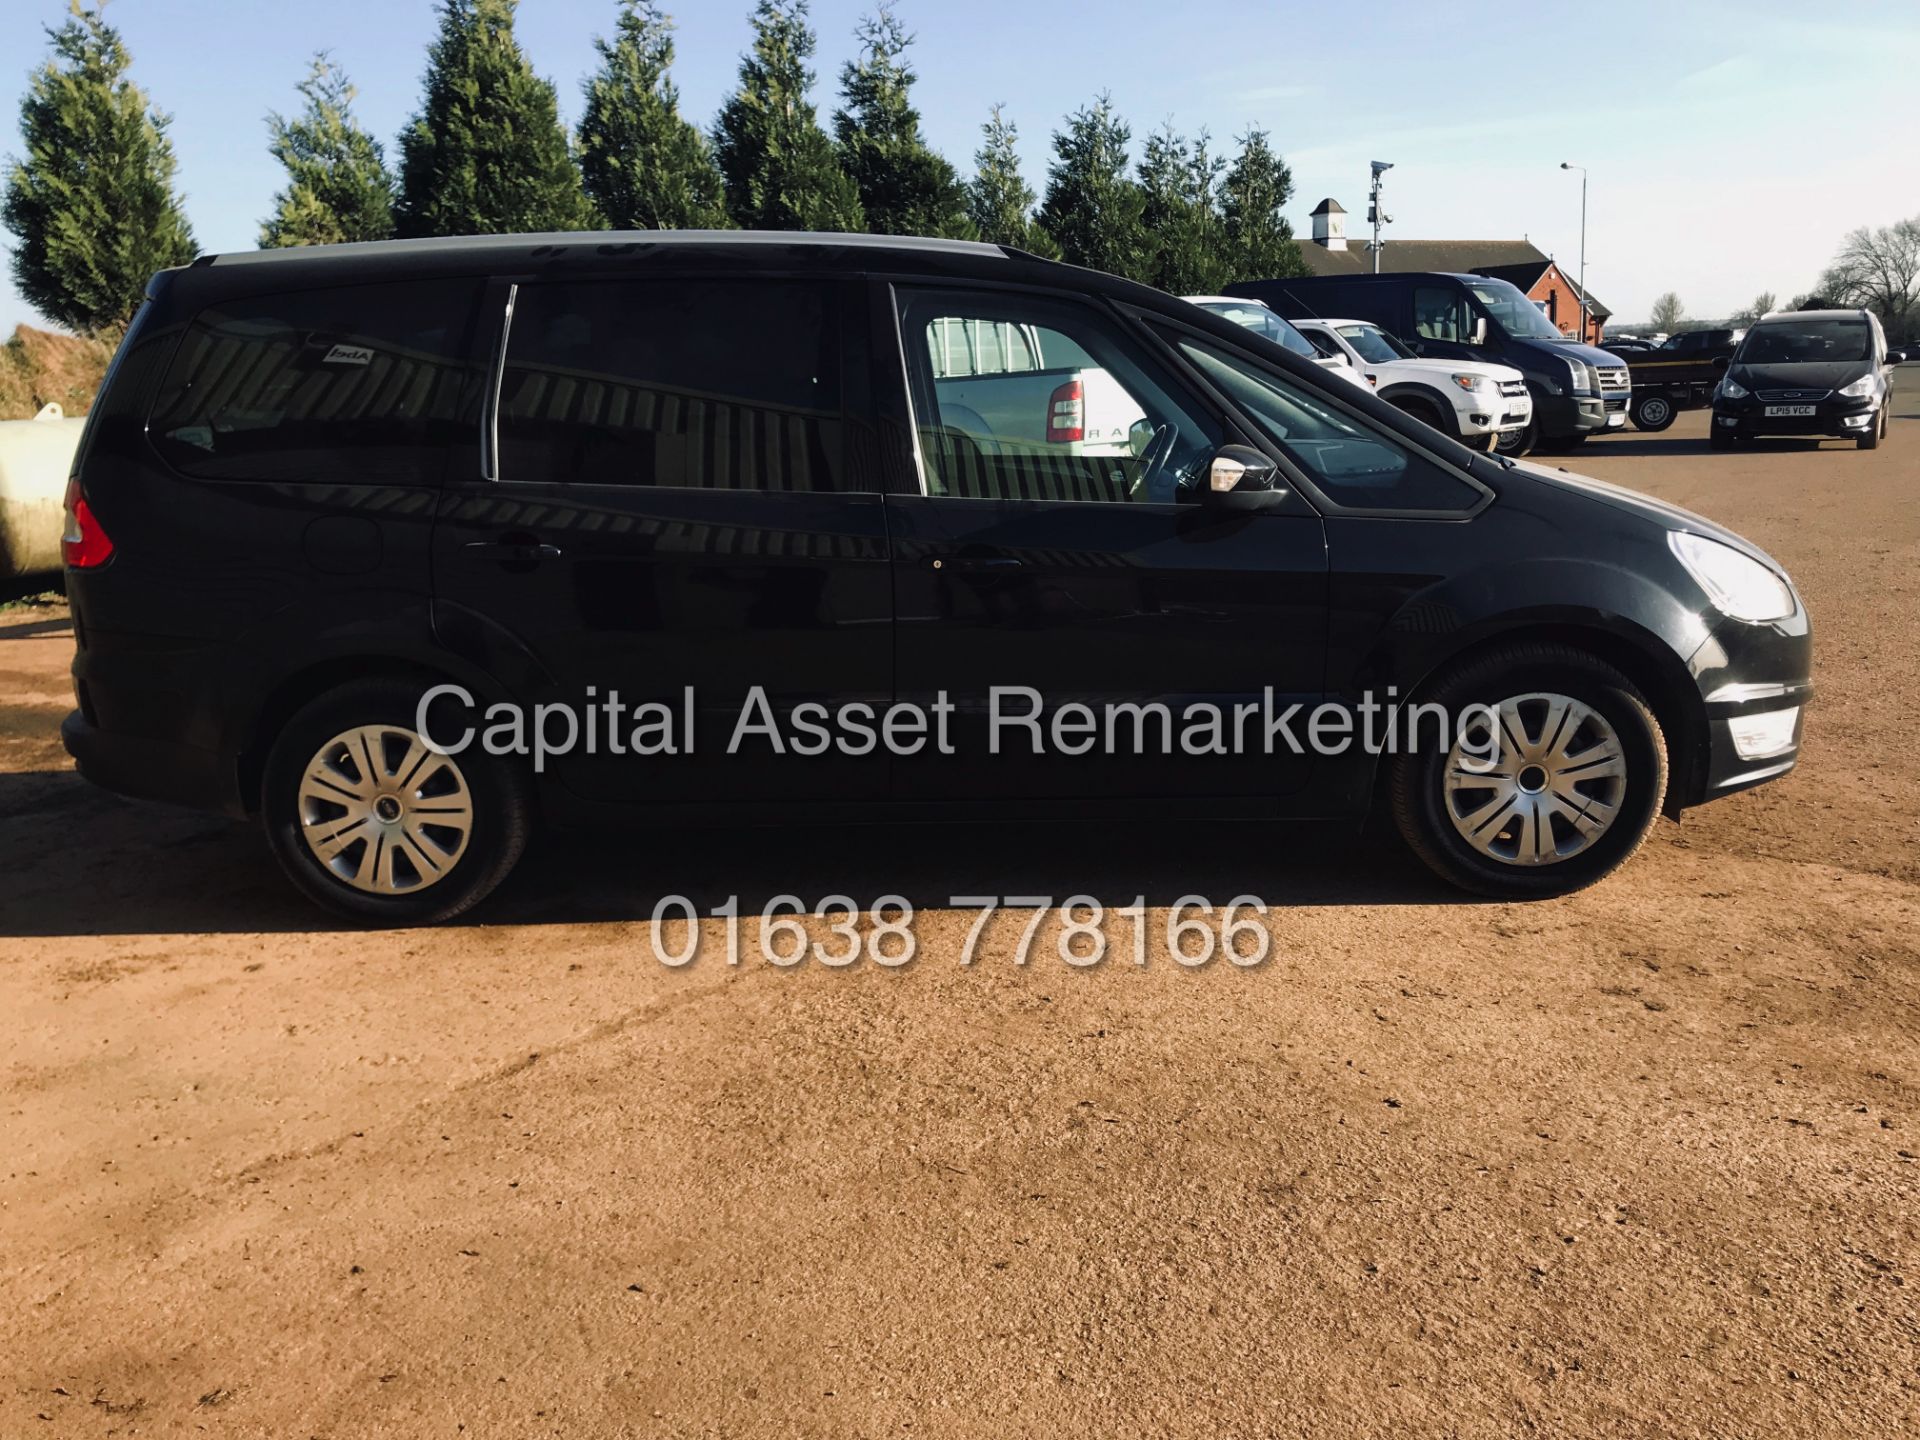 On Sale FORD GALAXY 2.0TDCI "ZETEC - POWERSHIFT" 7 SEATER (15 REG) AIR CON - 1 OWNER - 140BHP ENGINE - Image 4 of 17